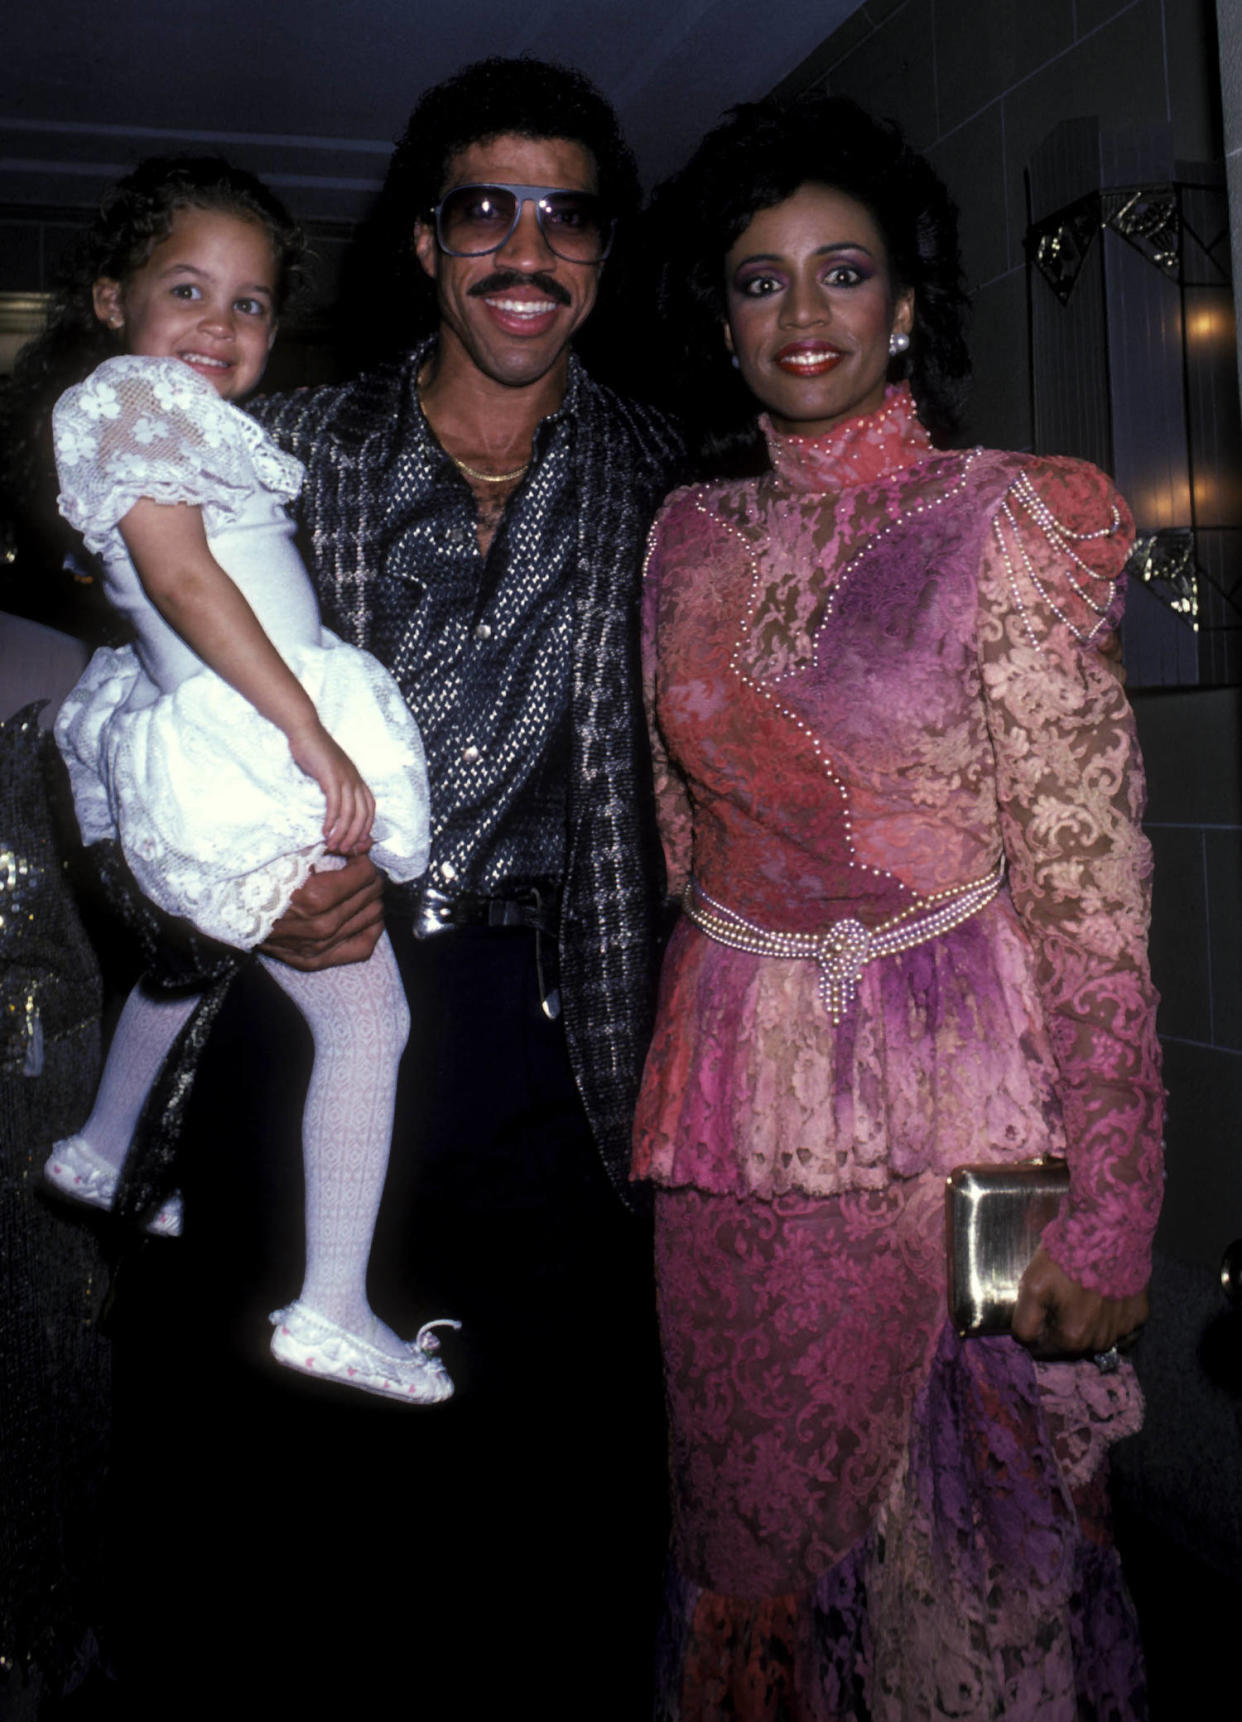 A young Nicole Richie with father Lionel Richie and mother Brenda Harvey Richie at a benefit concert in 1985. (Ron Galella, Ltd. / Ron Galella Collection via Getty Images)